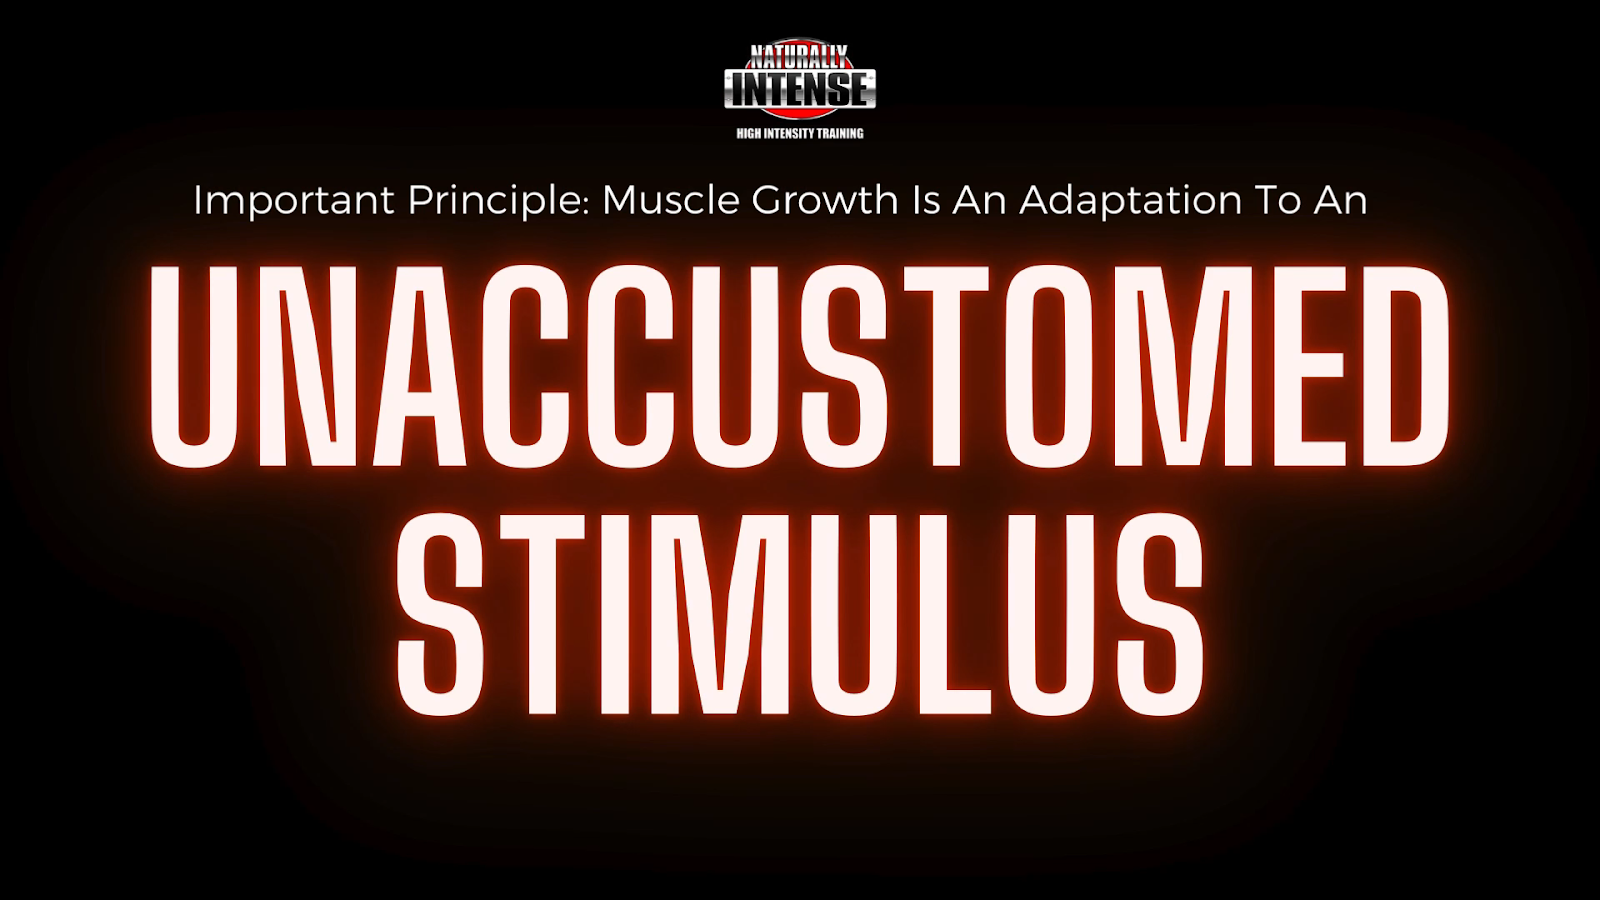 Muscles grow in response to unaccustomed stimulus